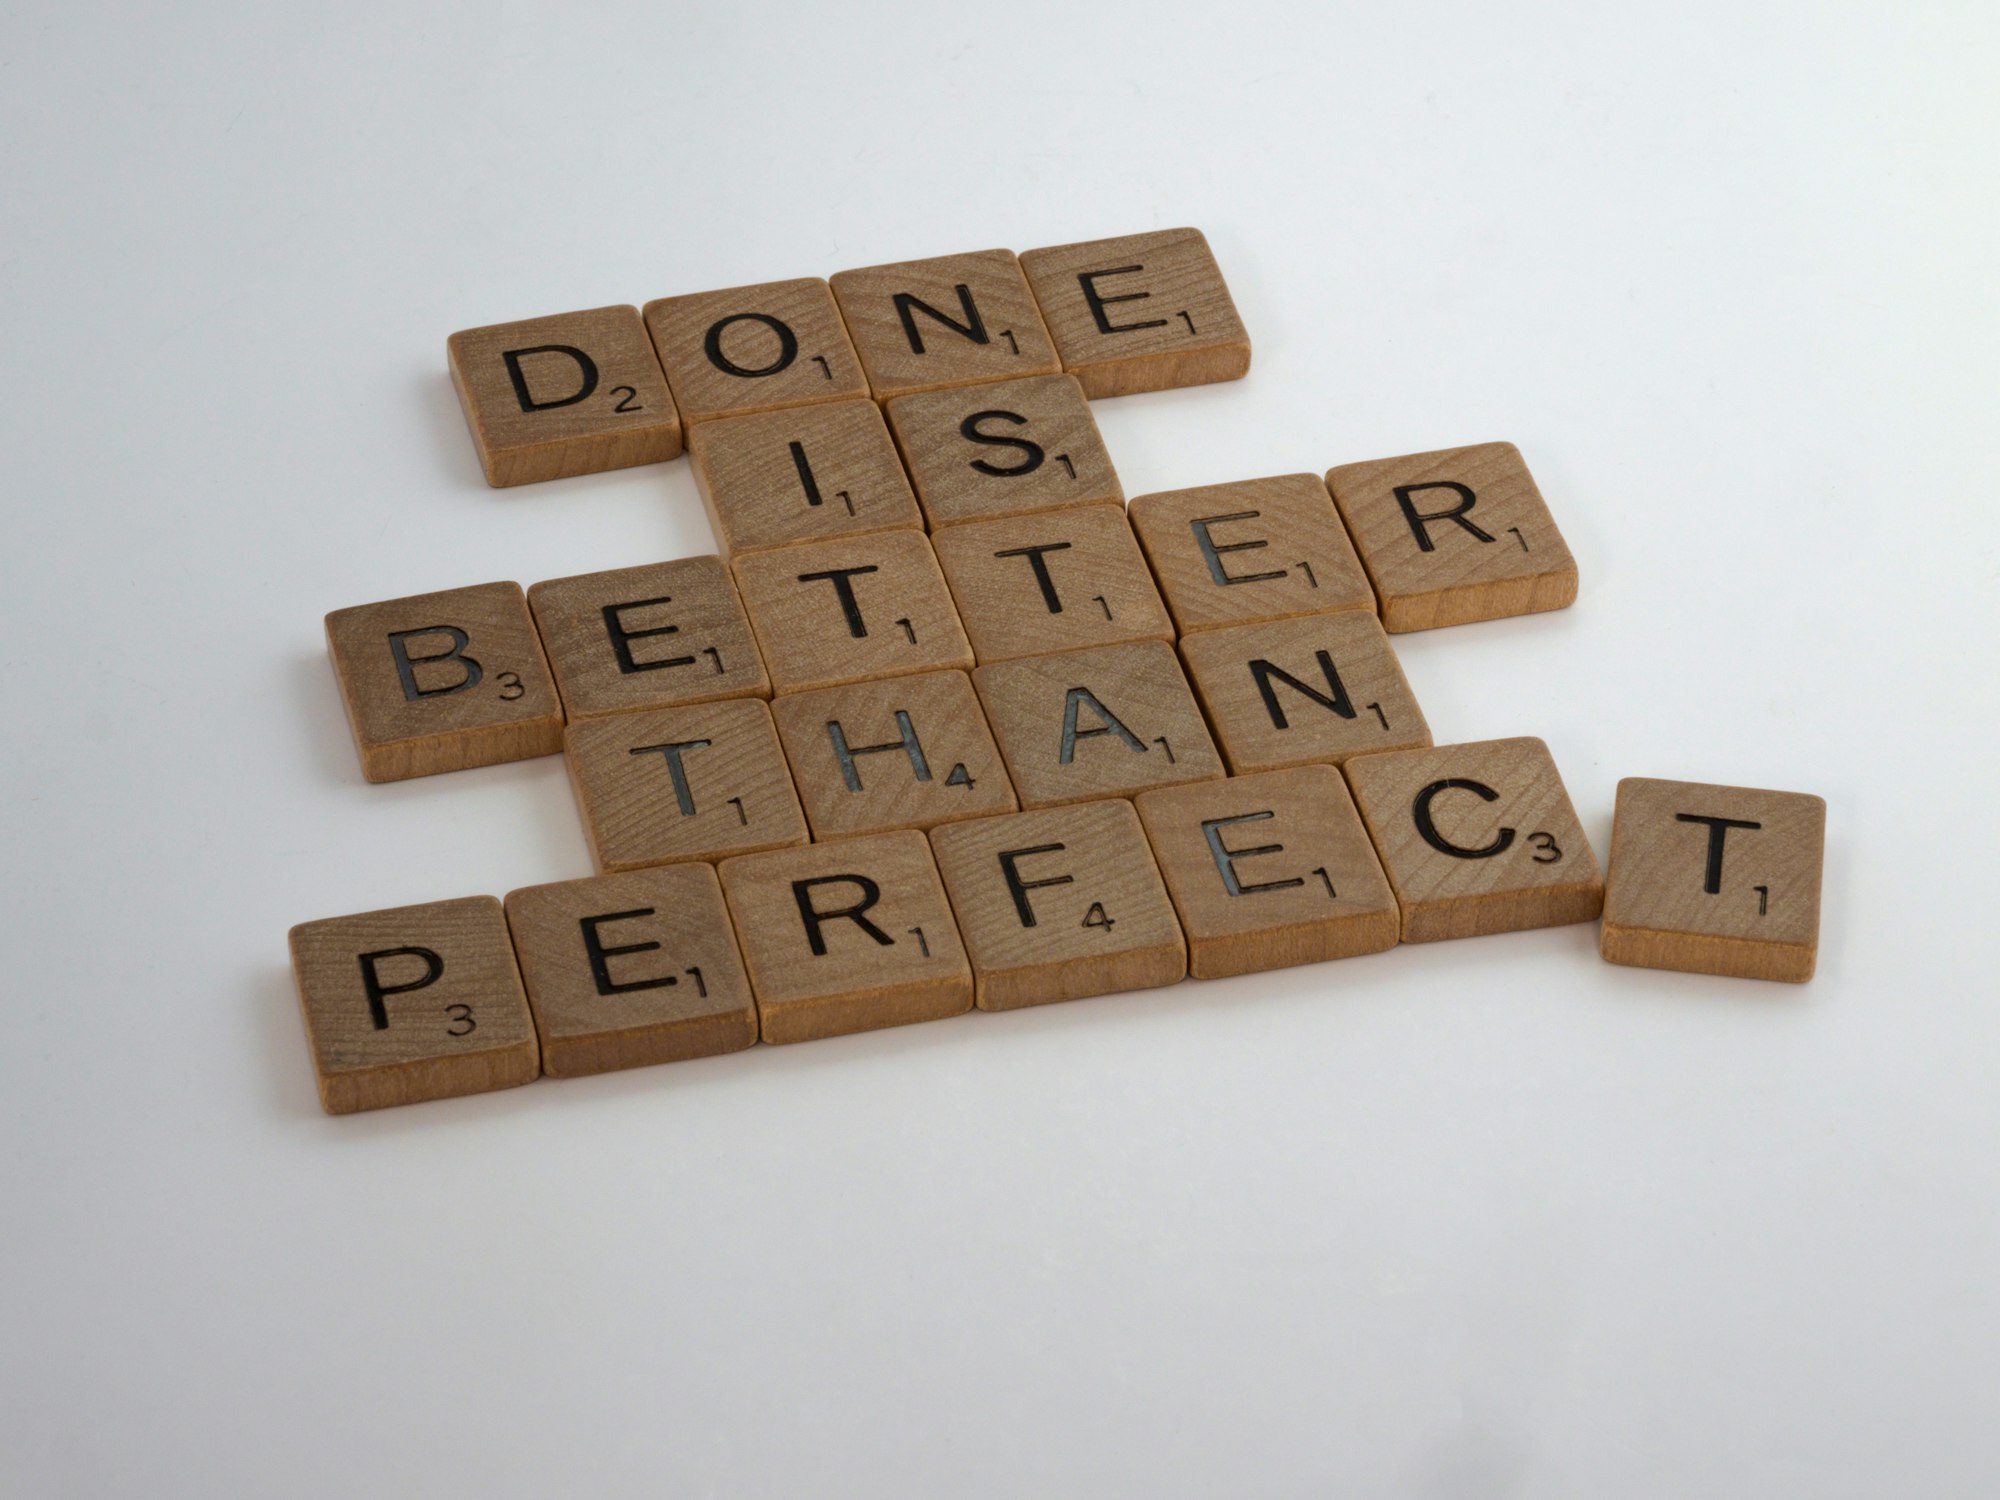 scrabble, scrabble pieces, lettering, letters, white background, wood, scrabble tiles, wood, words, 
done is better than perfect, perfectionism, get it done, complete, finish, rough and ready, 
